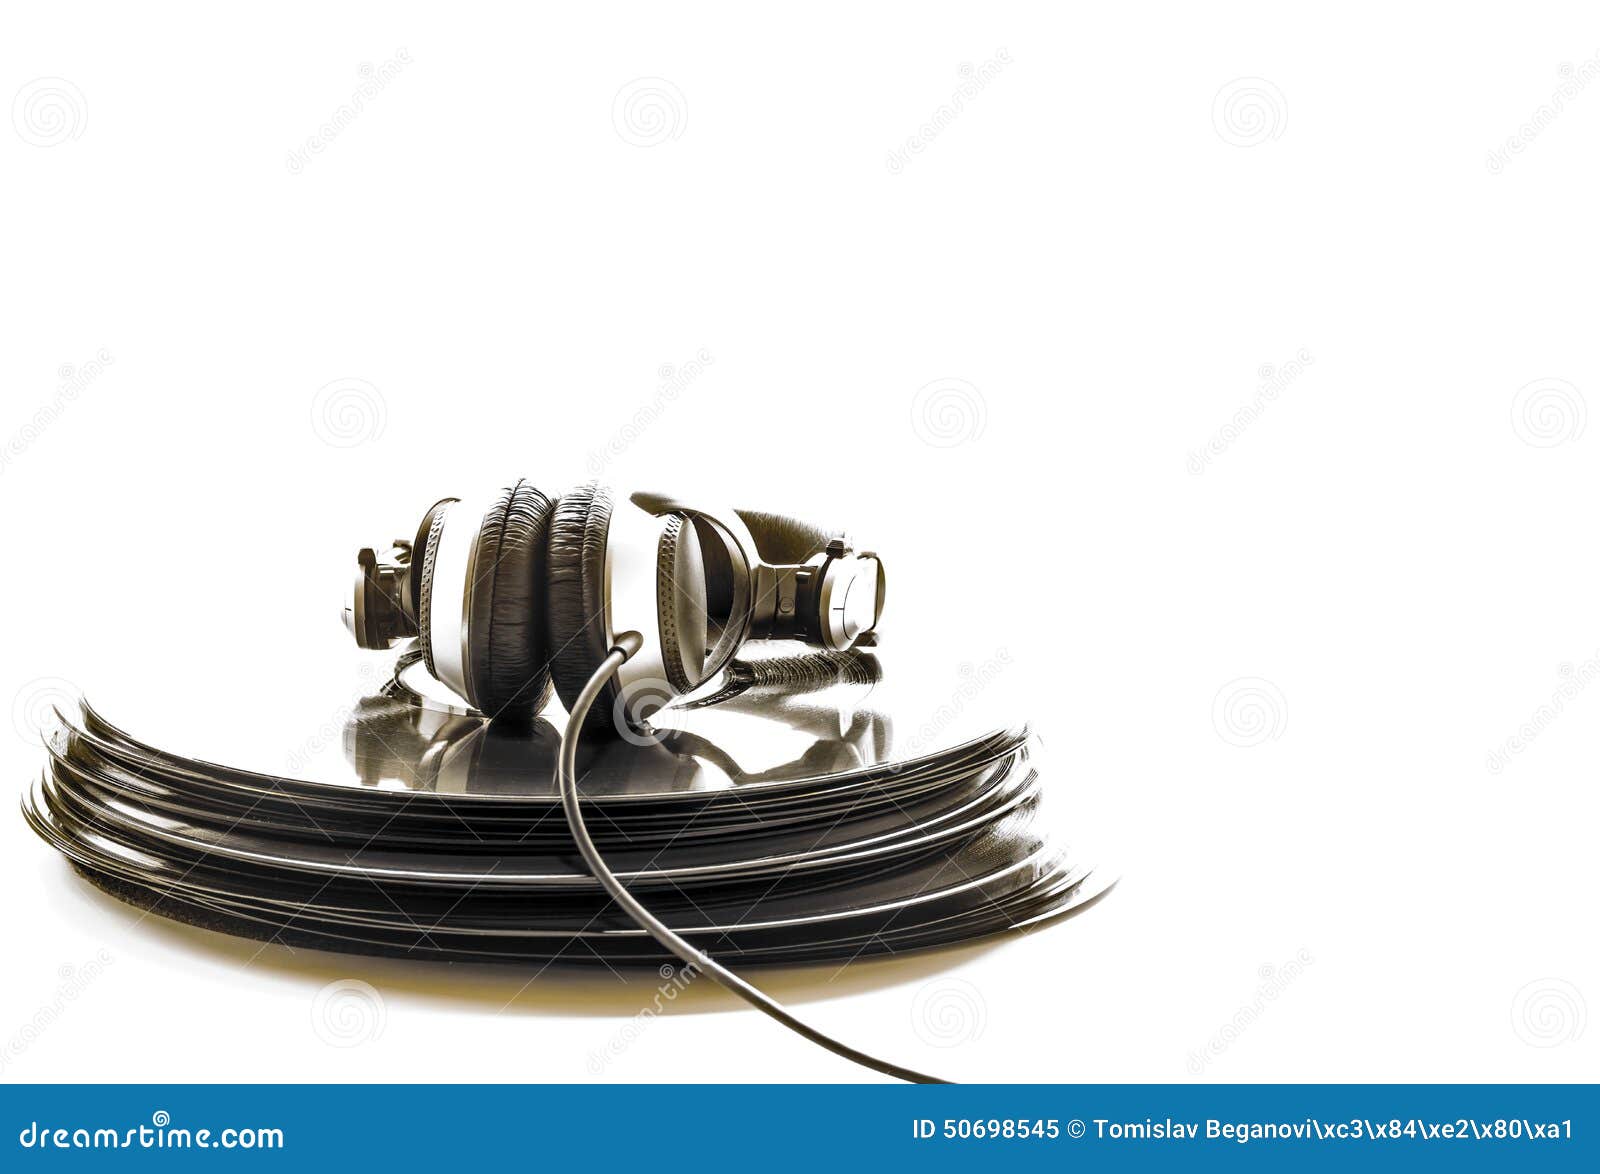 headphones lying on the stack of vinyl records.